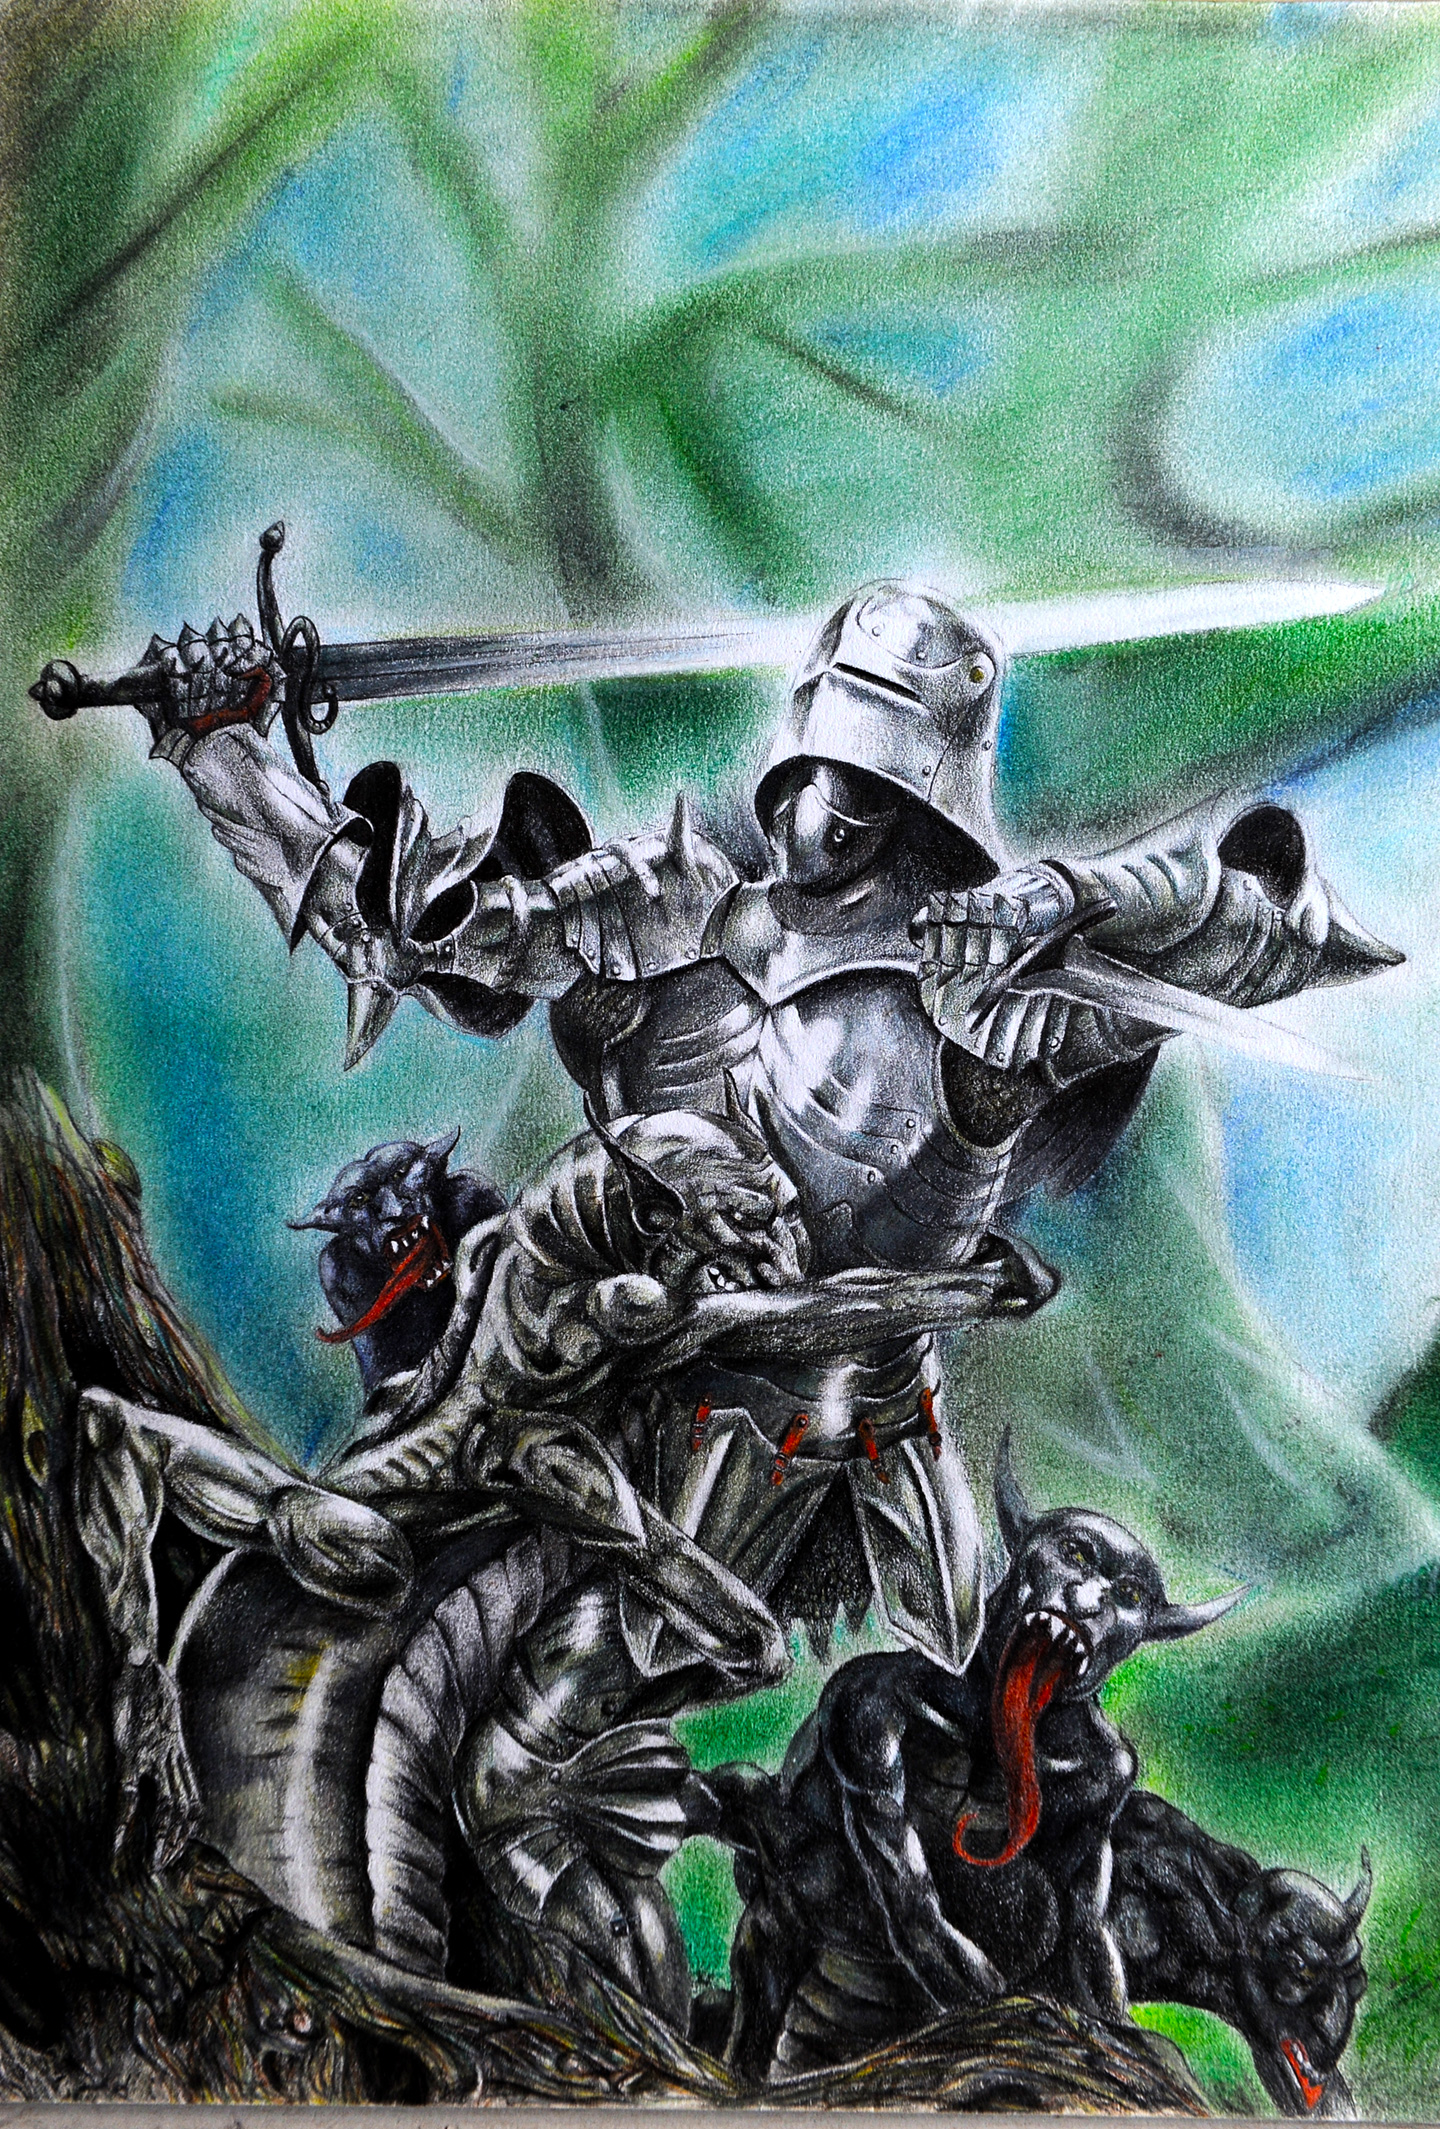 A color drawing of a knight fighting against evil creatures in some dark woods